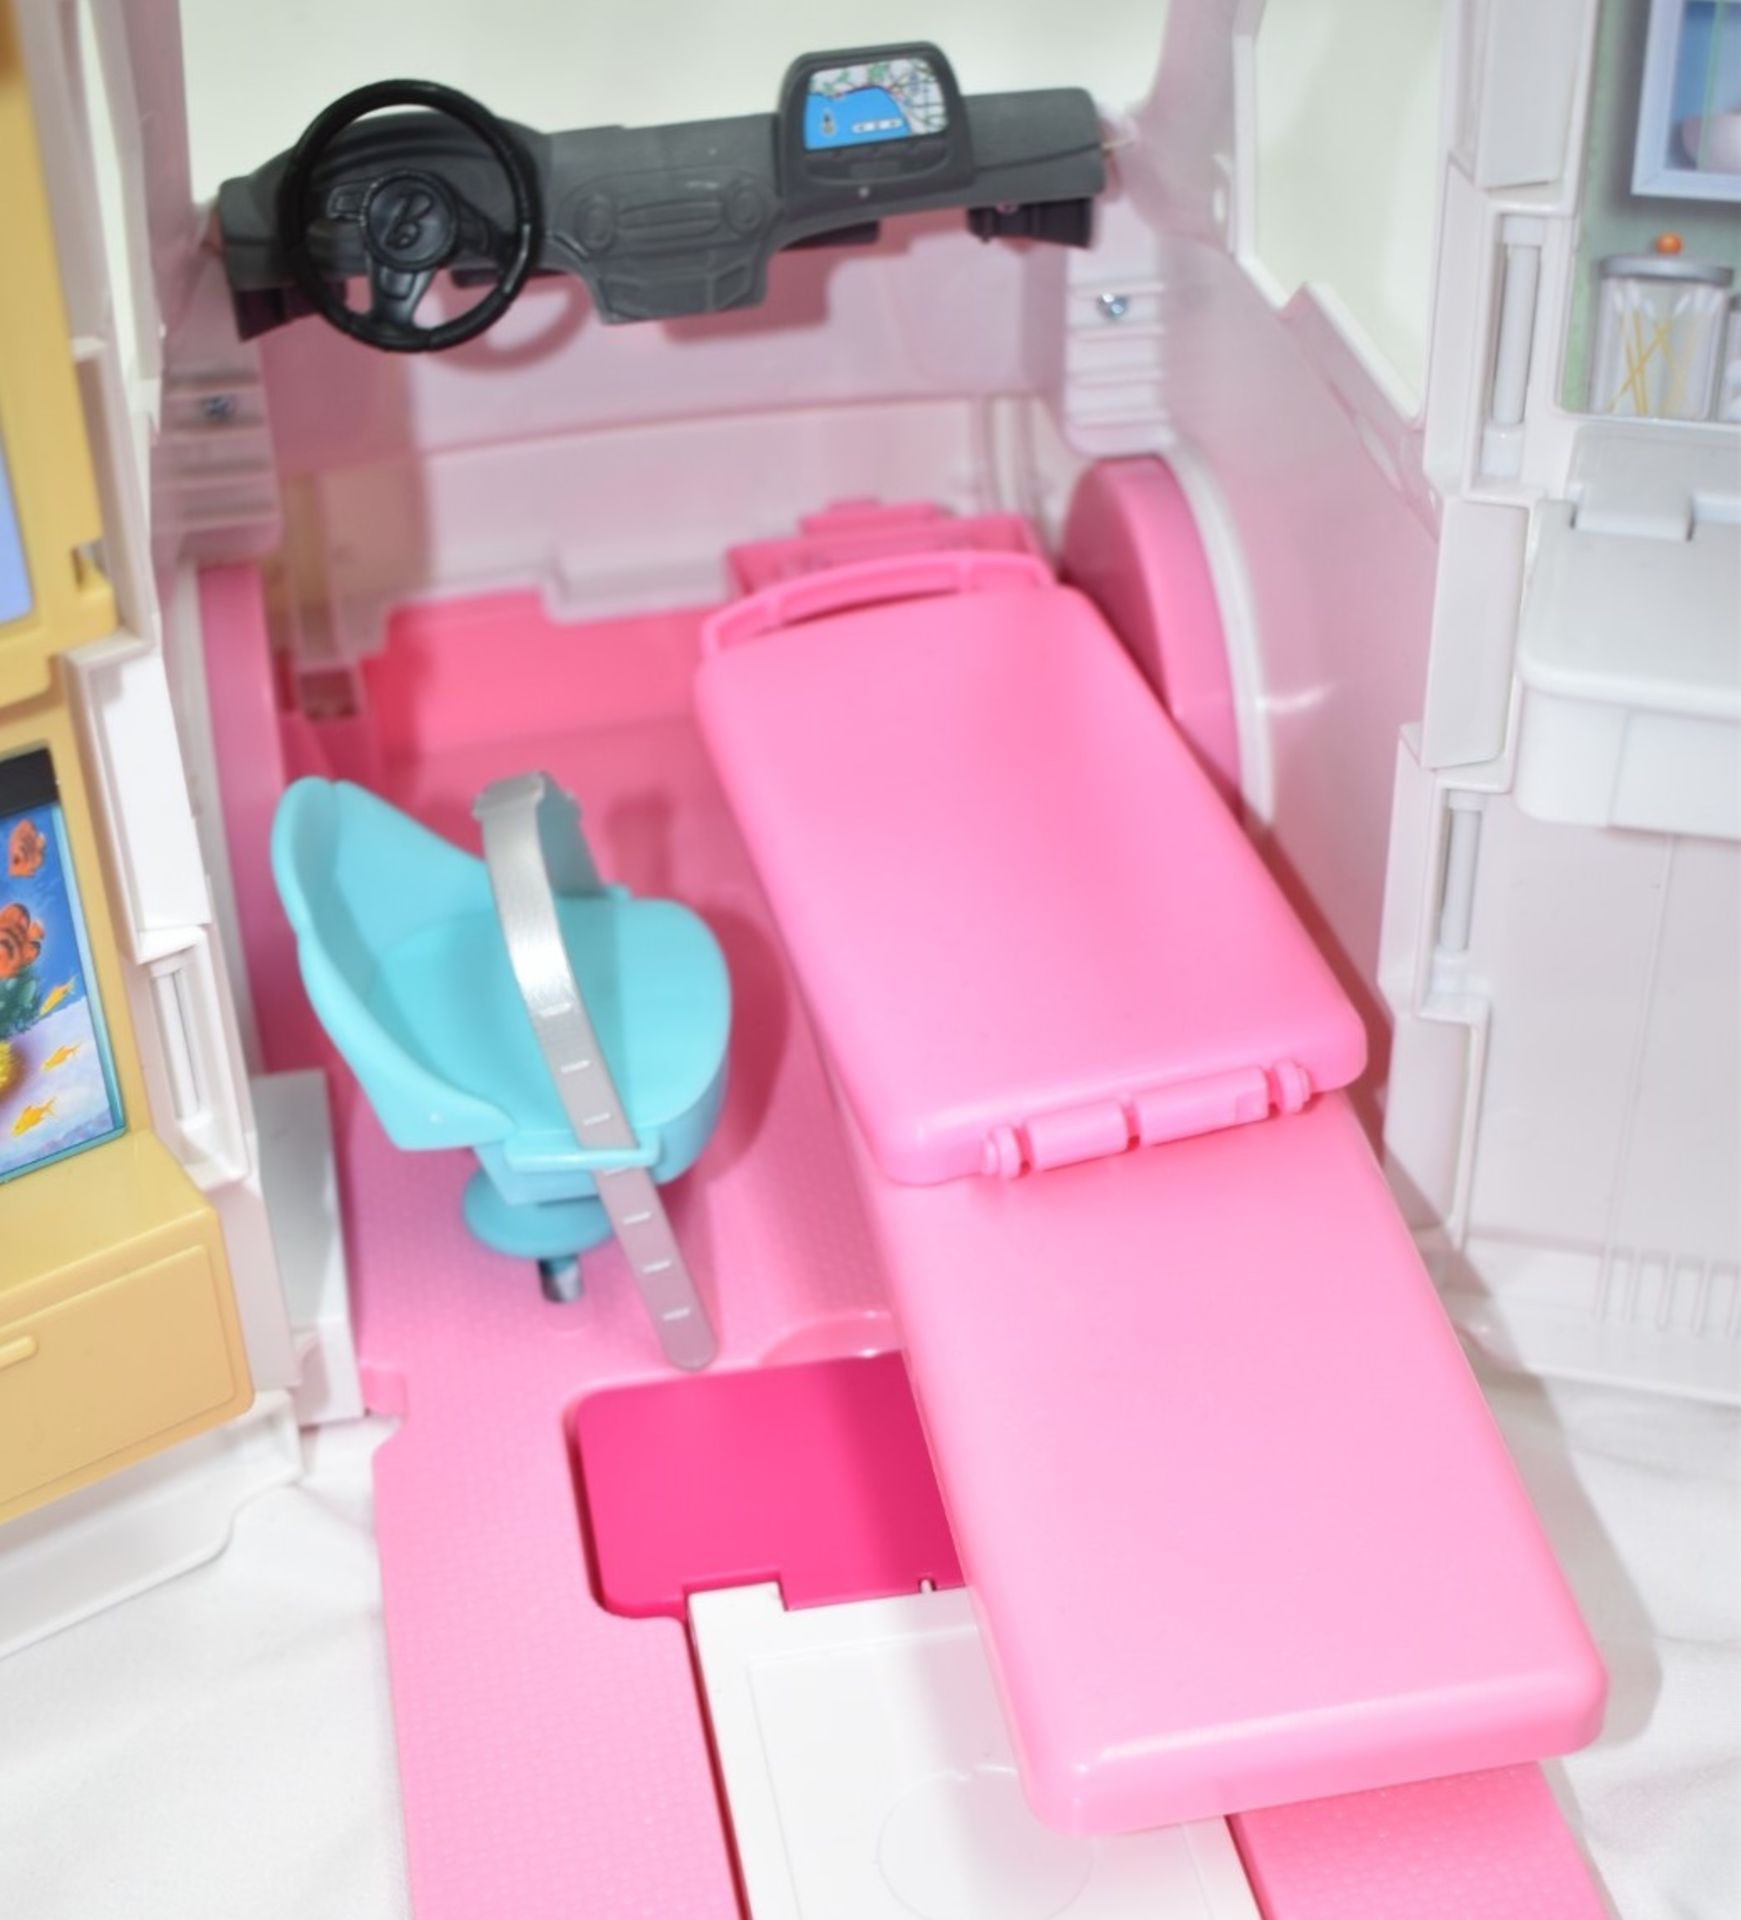 1 x BARBIE Care Clinic Playset With Siren Lights and Sound - Original Price £62.95 - Boxed Stock - Image 9 of 11